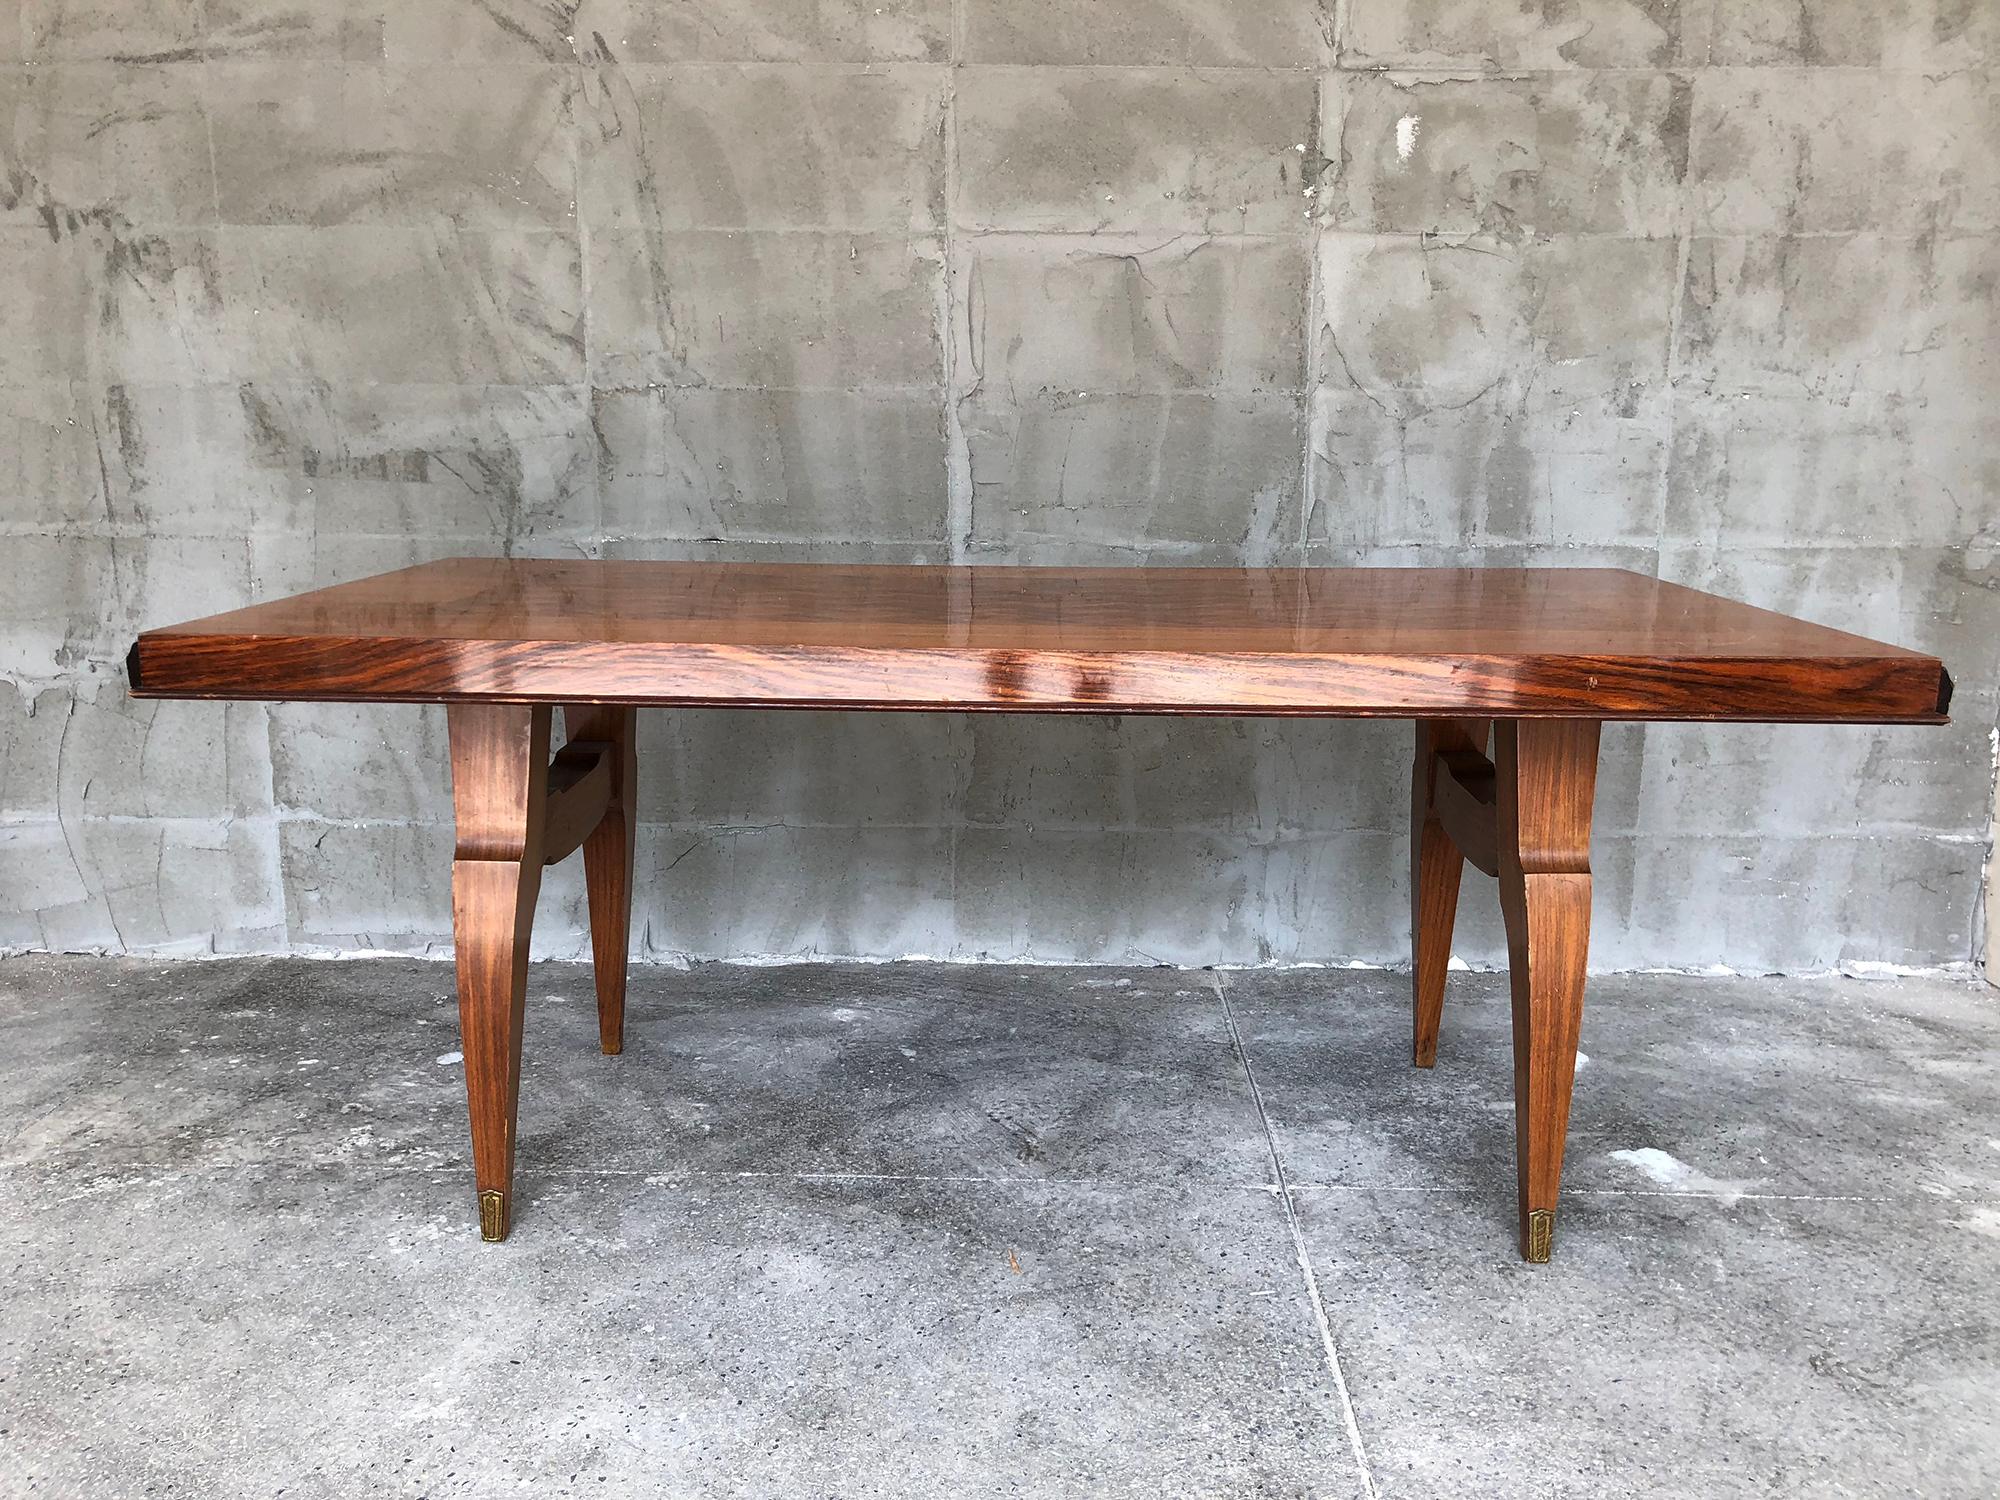 This table was produced in France in the first half of the 20th century of palisander, marquetry technique. Except for a few scratches on the varnish, the table is in quite good condition. It is extendable, but the original extensions are missing.